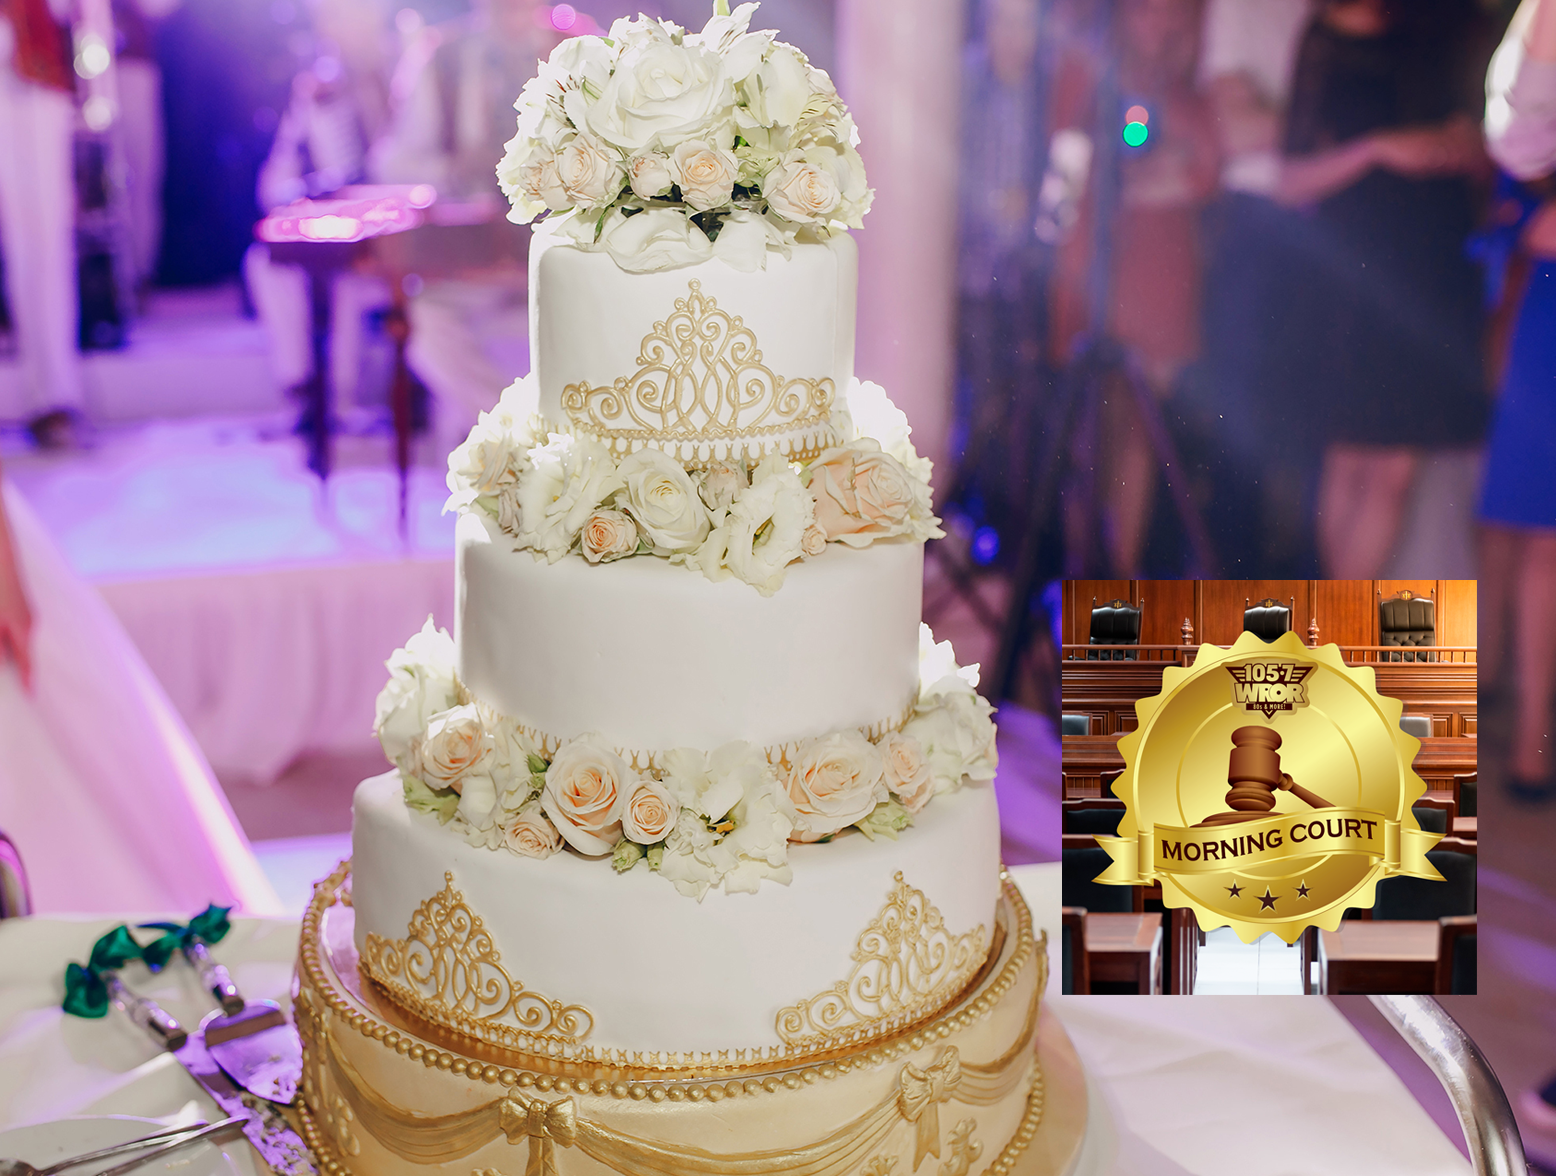 Morning Court Case of the Cake Faced Bride! 2/1 7:40 am - The ROR Morning Show Podcast